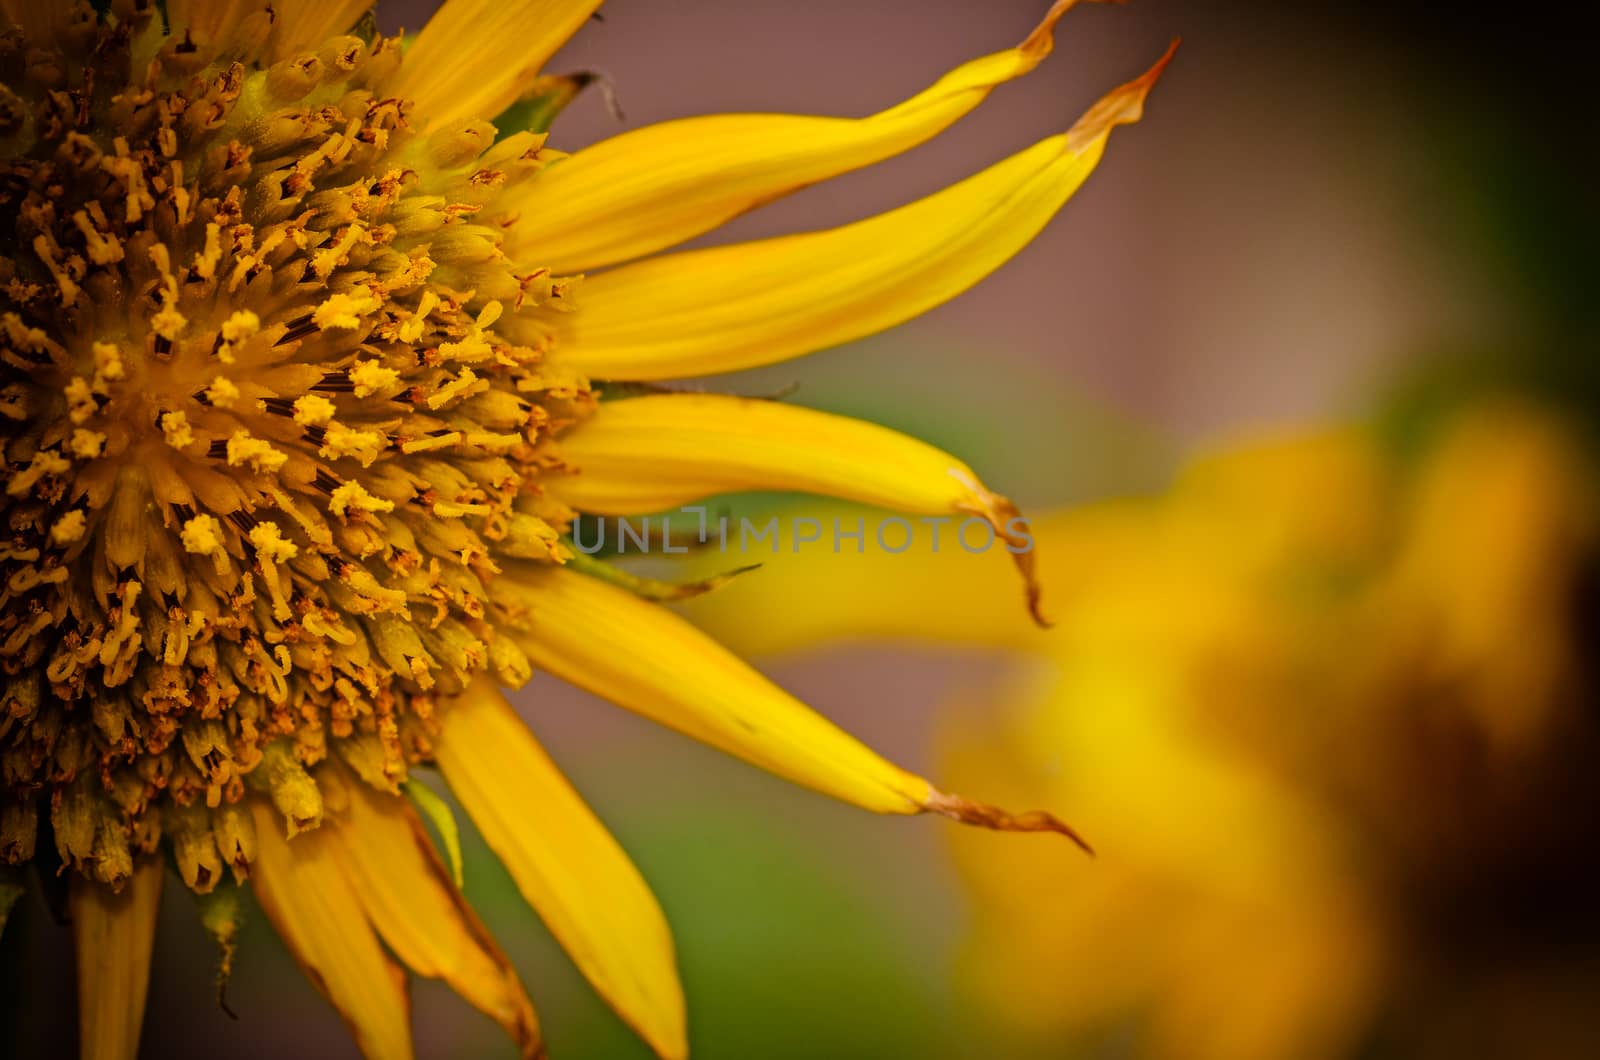 sunflowers close up in vintage light